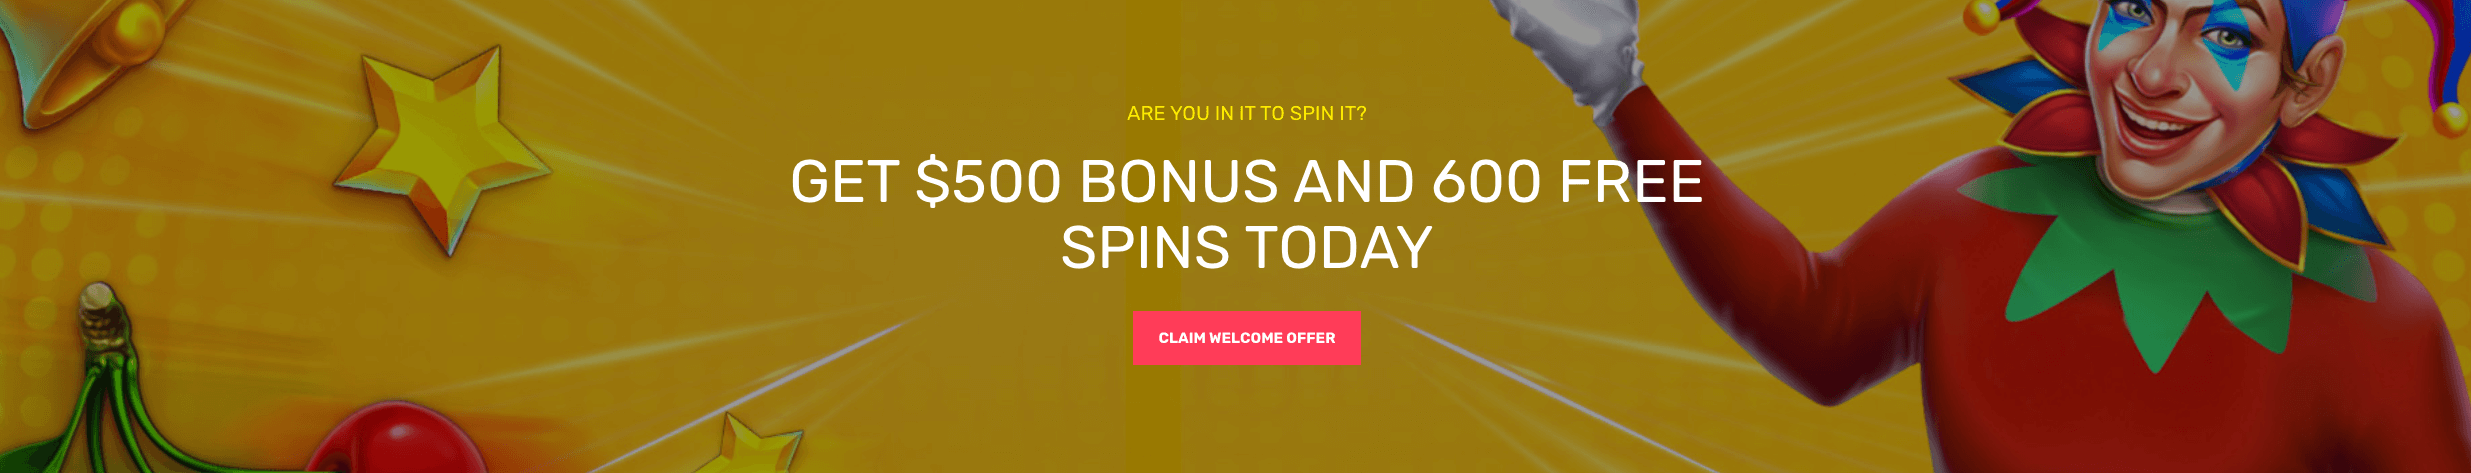 JustSpin casino welcome offer